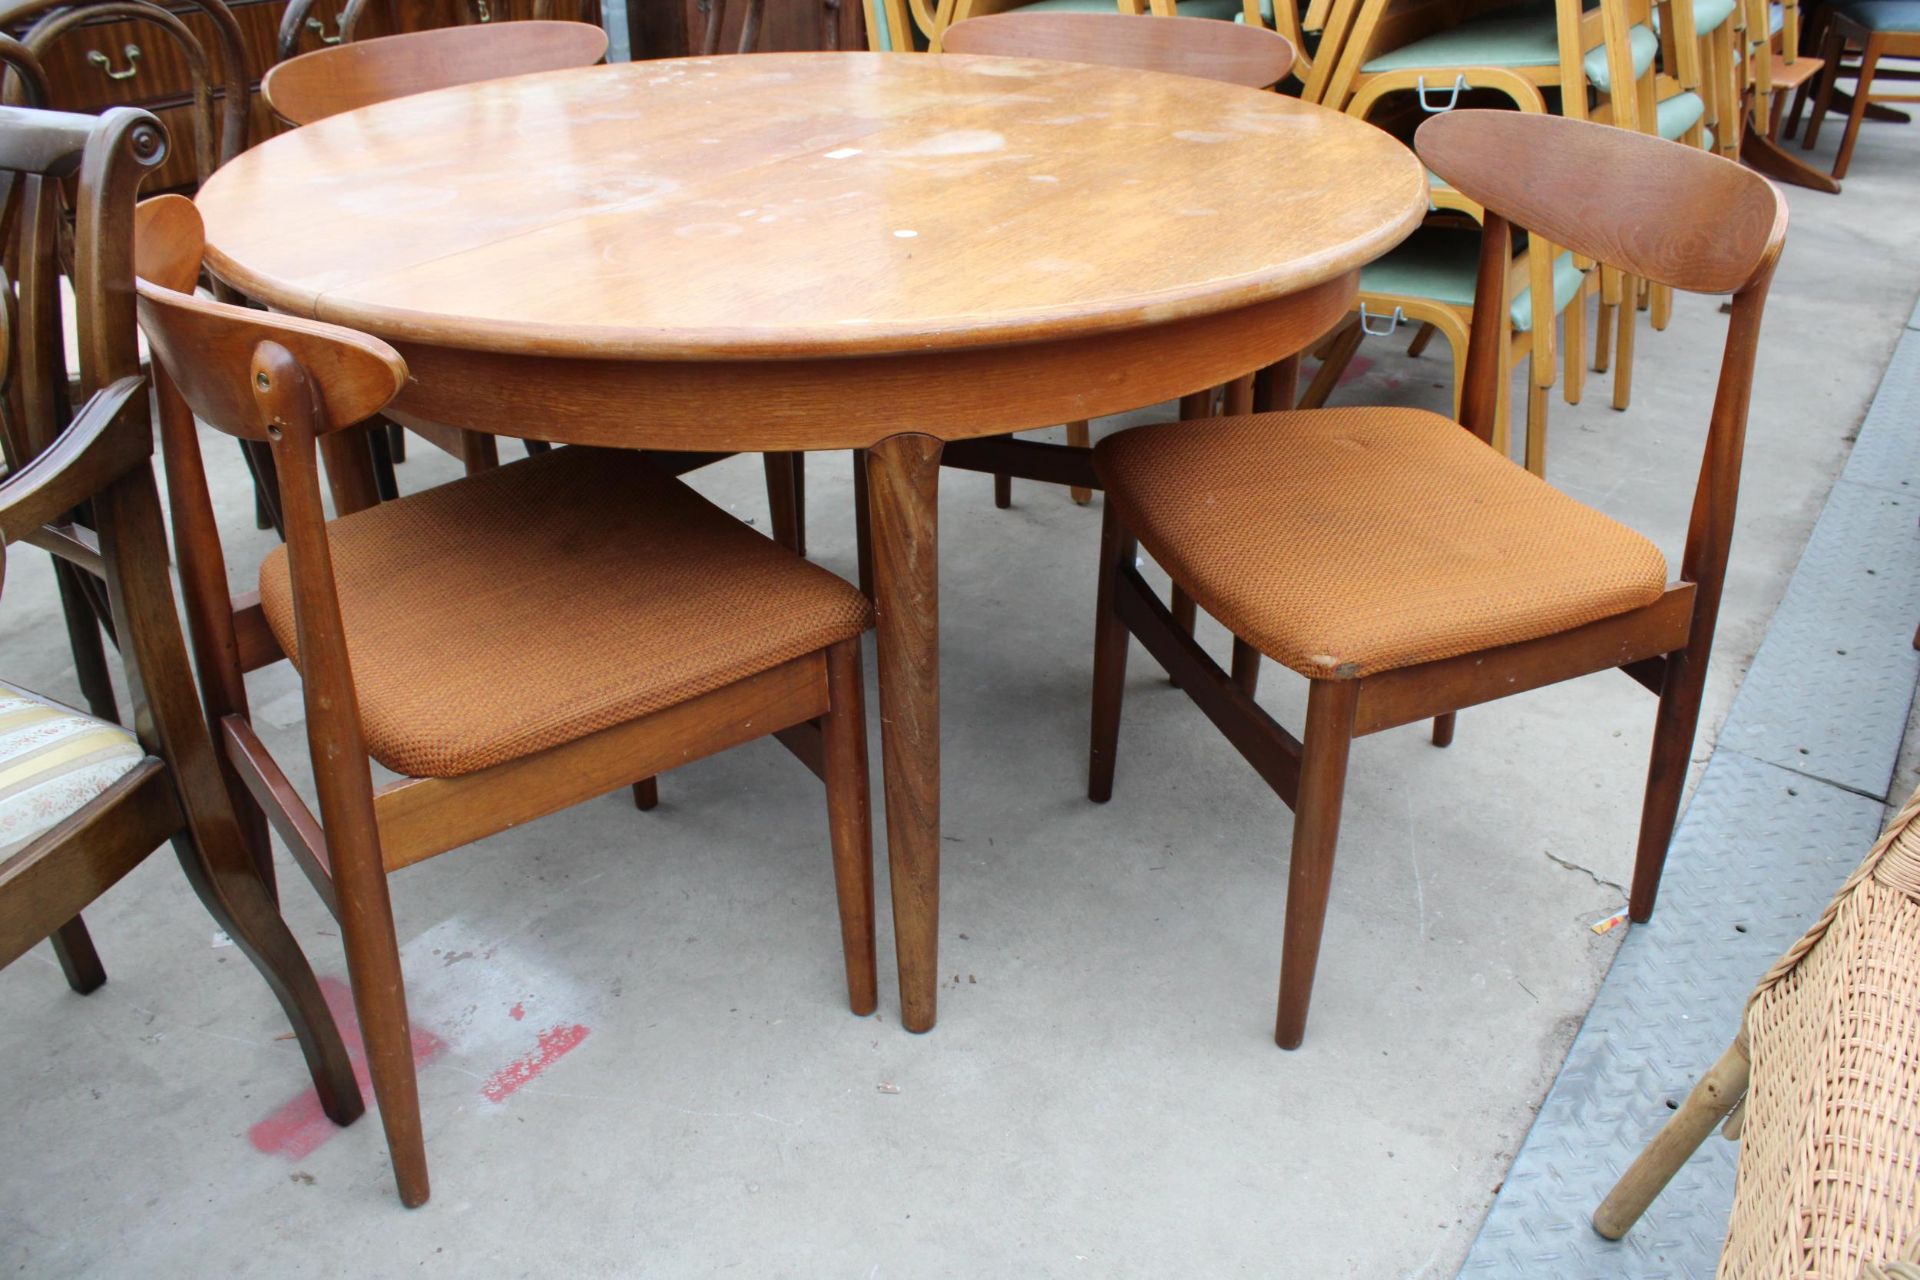 A RETRO TEAK EXTENDING DINING TABLE 48" DIAMETER (LEAF 18") AND FOUR CHAIRS - Image 2 of 2